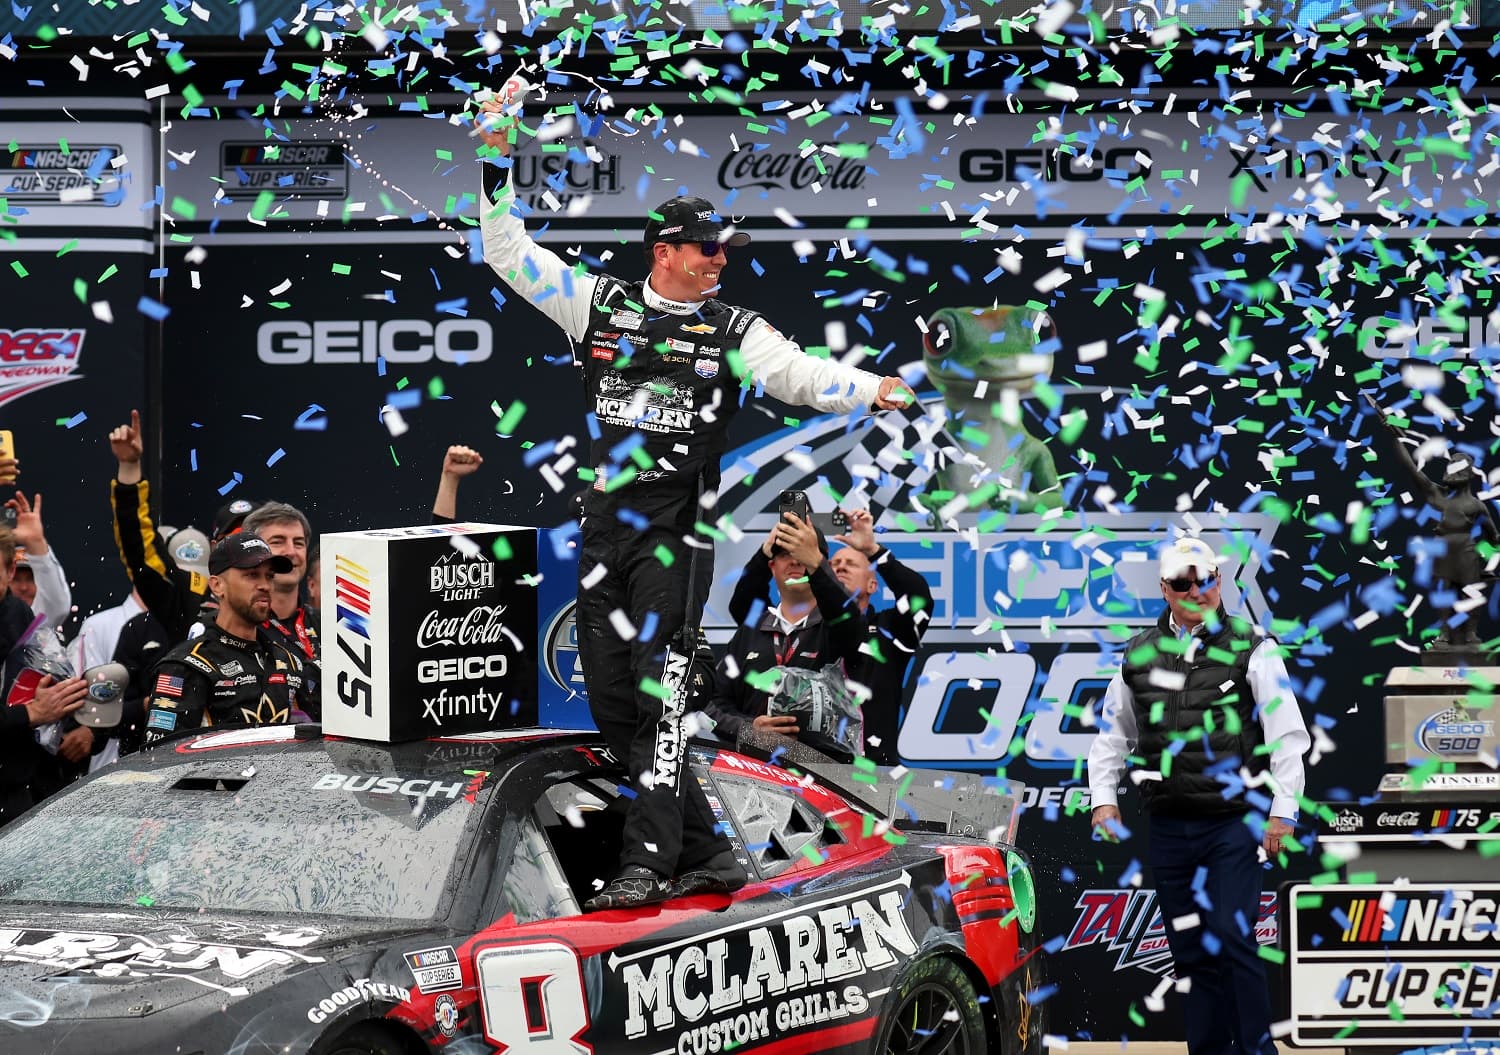 Kyle Busch, driver of the No. 8 McLaren Custom Grills Chevrolet, celebrates in Victory Lane after winning the NASCAR Cup Series GEICO 500 at Talladega Superspeedway on April 23, 2023.